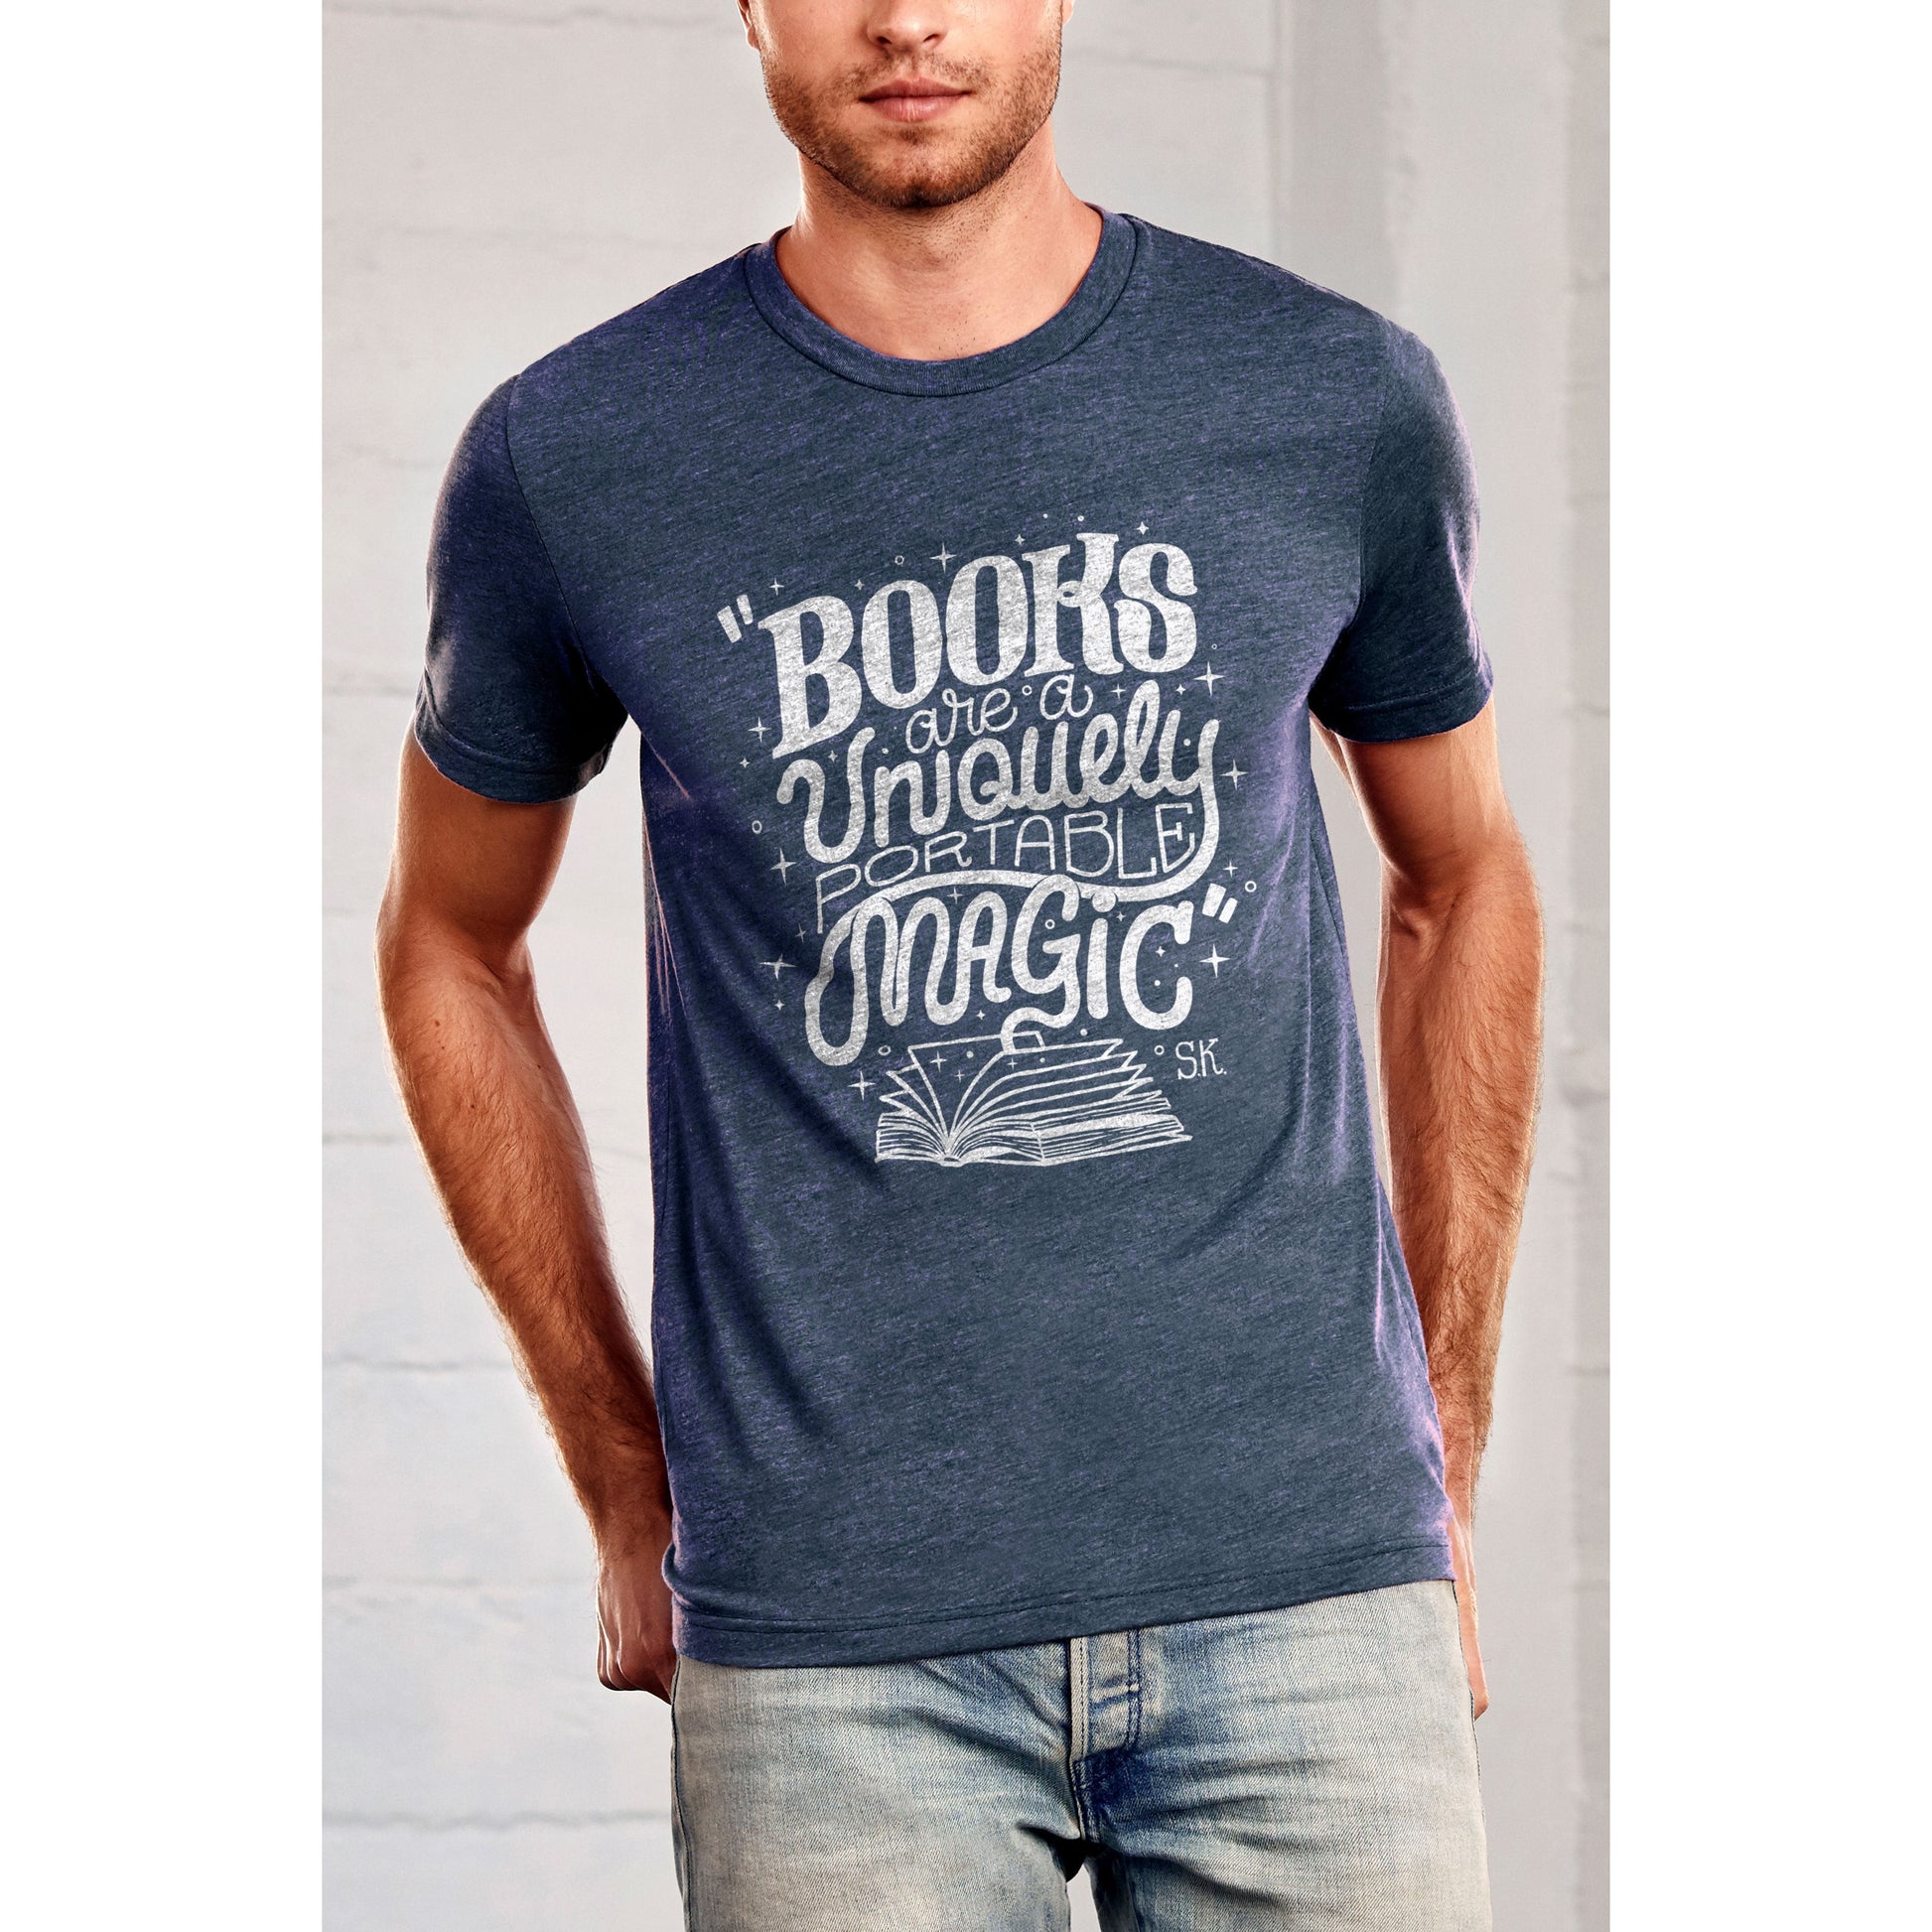 “Books Are A Uniquely Portable Magic.” - S.K. (Reference: Stephen King, A Memoir Of The Craft) - threadtank | stories you can wear